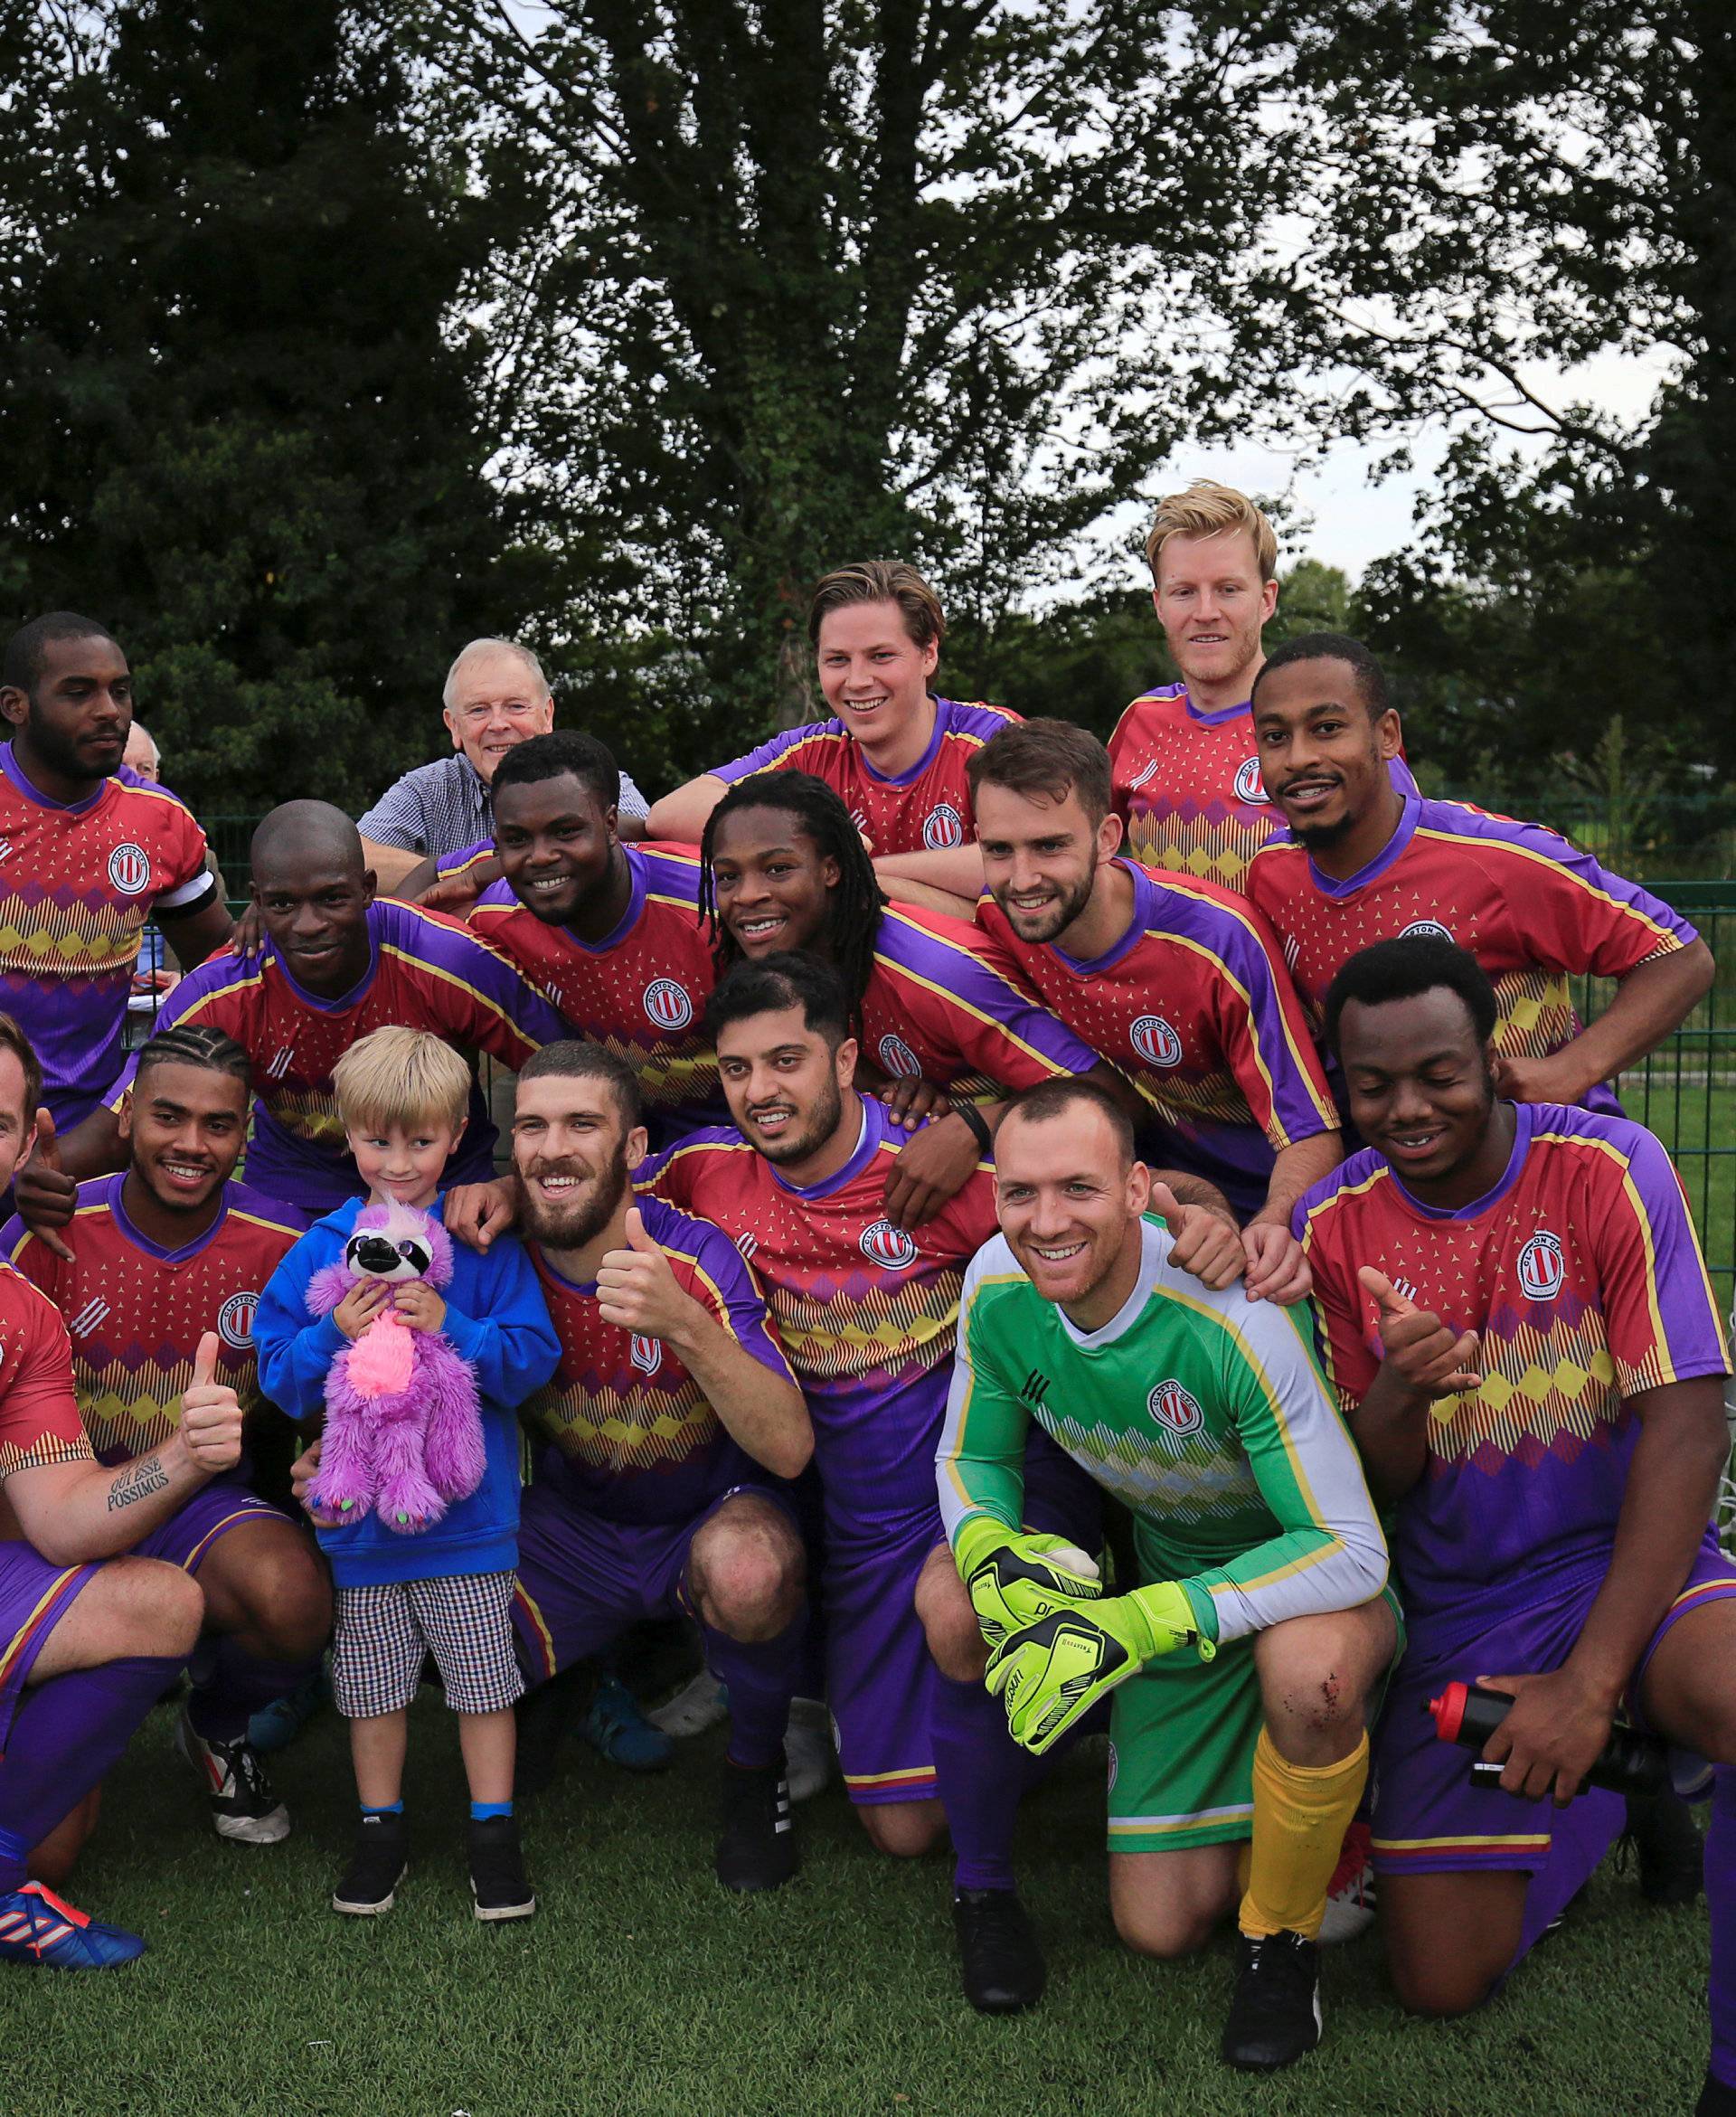 Clapton CFC players pose for a picture with one of their youngest supporter after winning 2-0 away game against Ealing Town in East Acton, in London